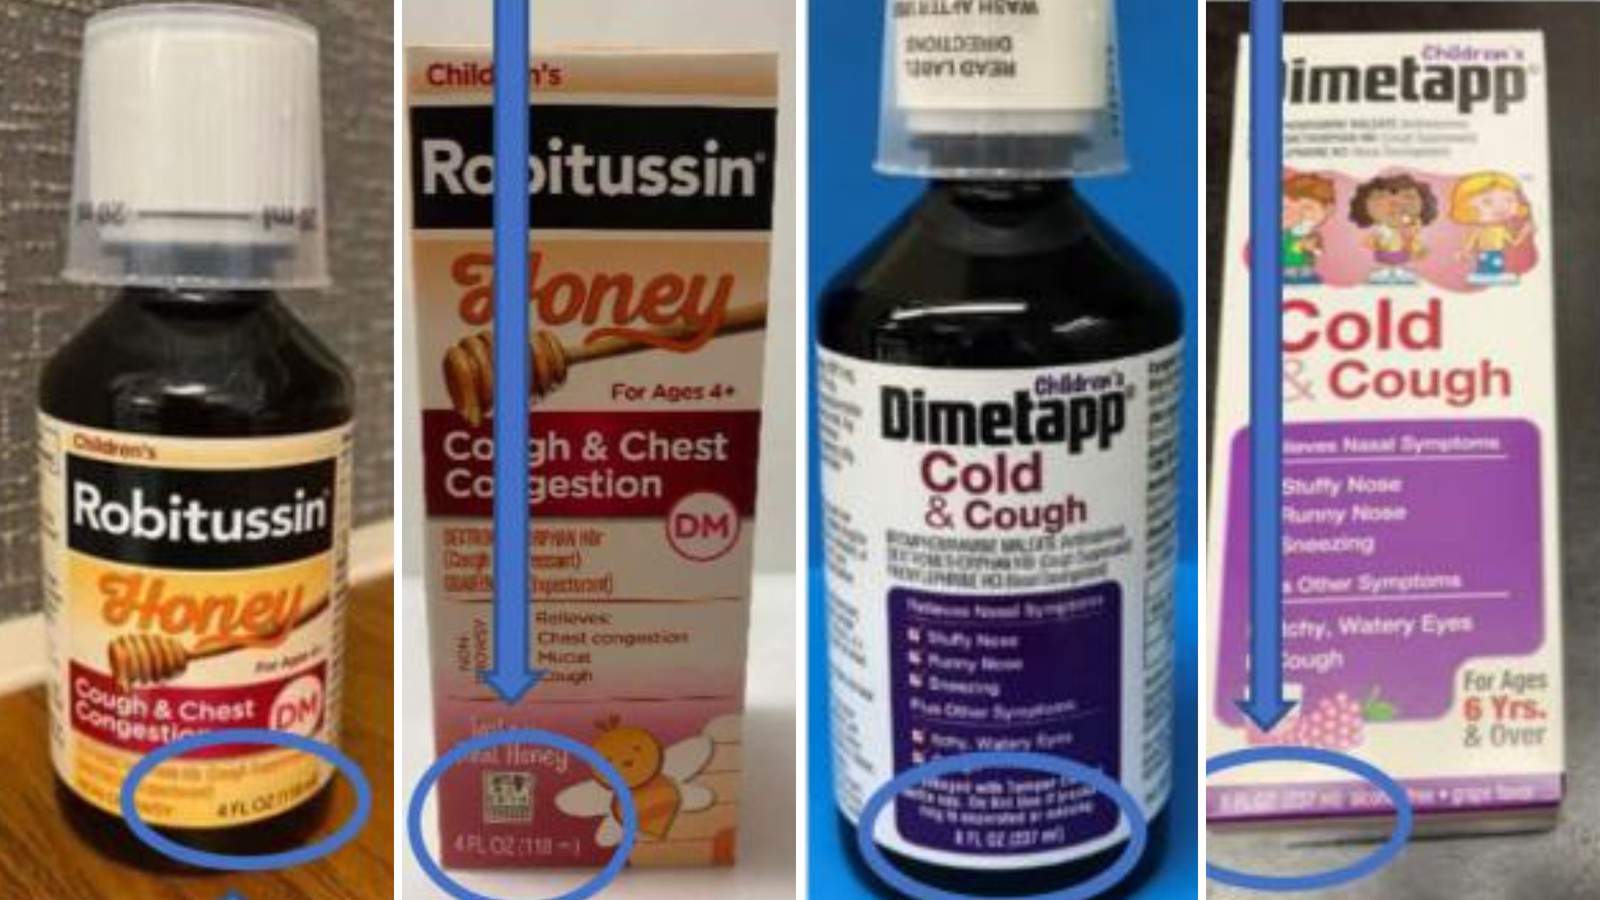 Children’s Robitussin and Dimetapp cough medicines recalled due to potential overdose risks